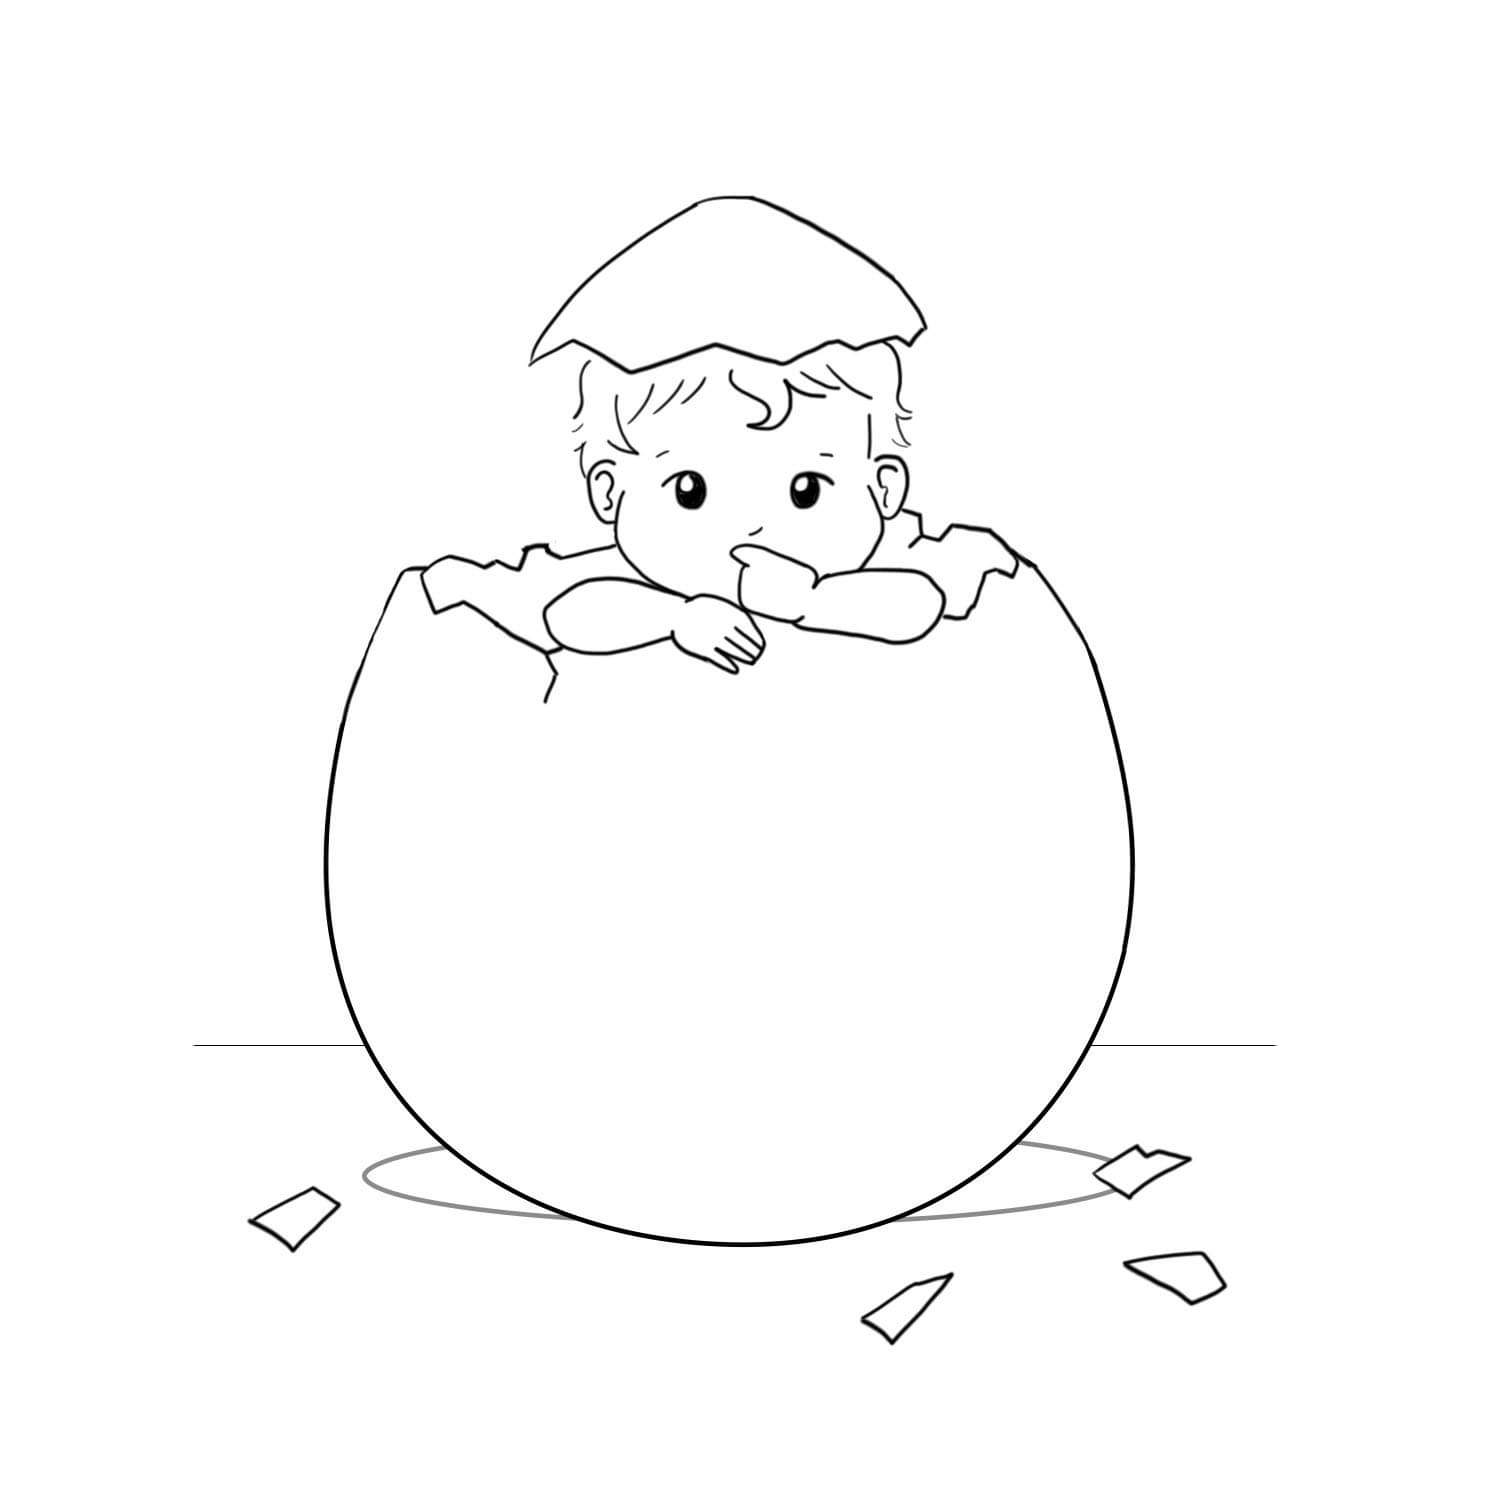 5. Chicken Baby chickie is ready to hatch!